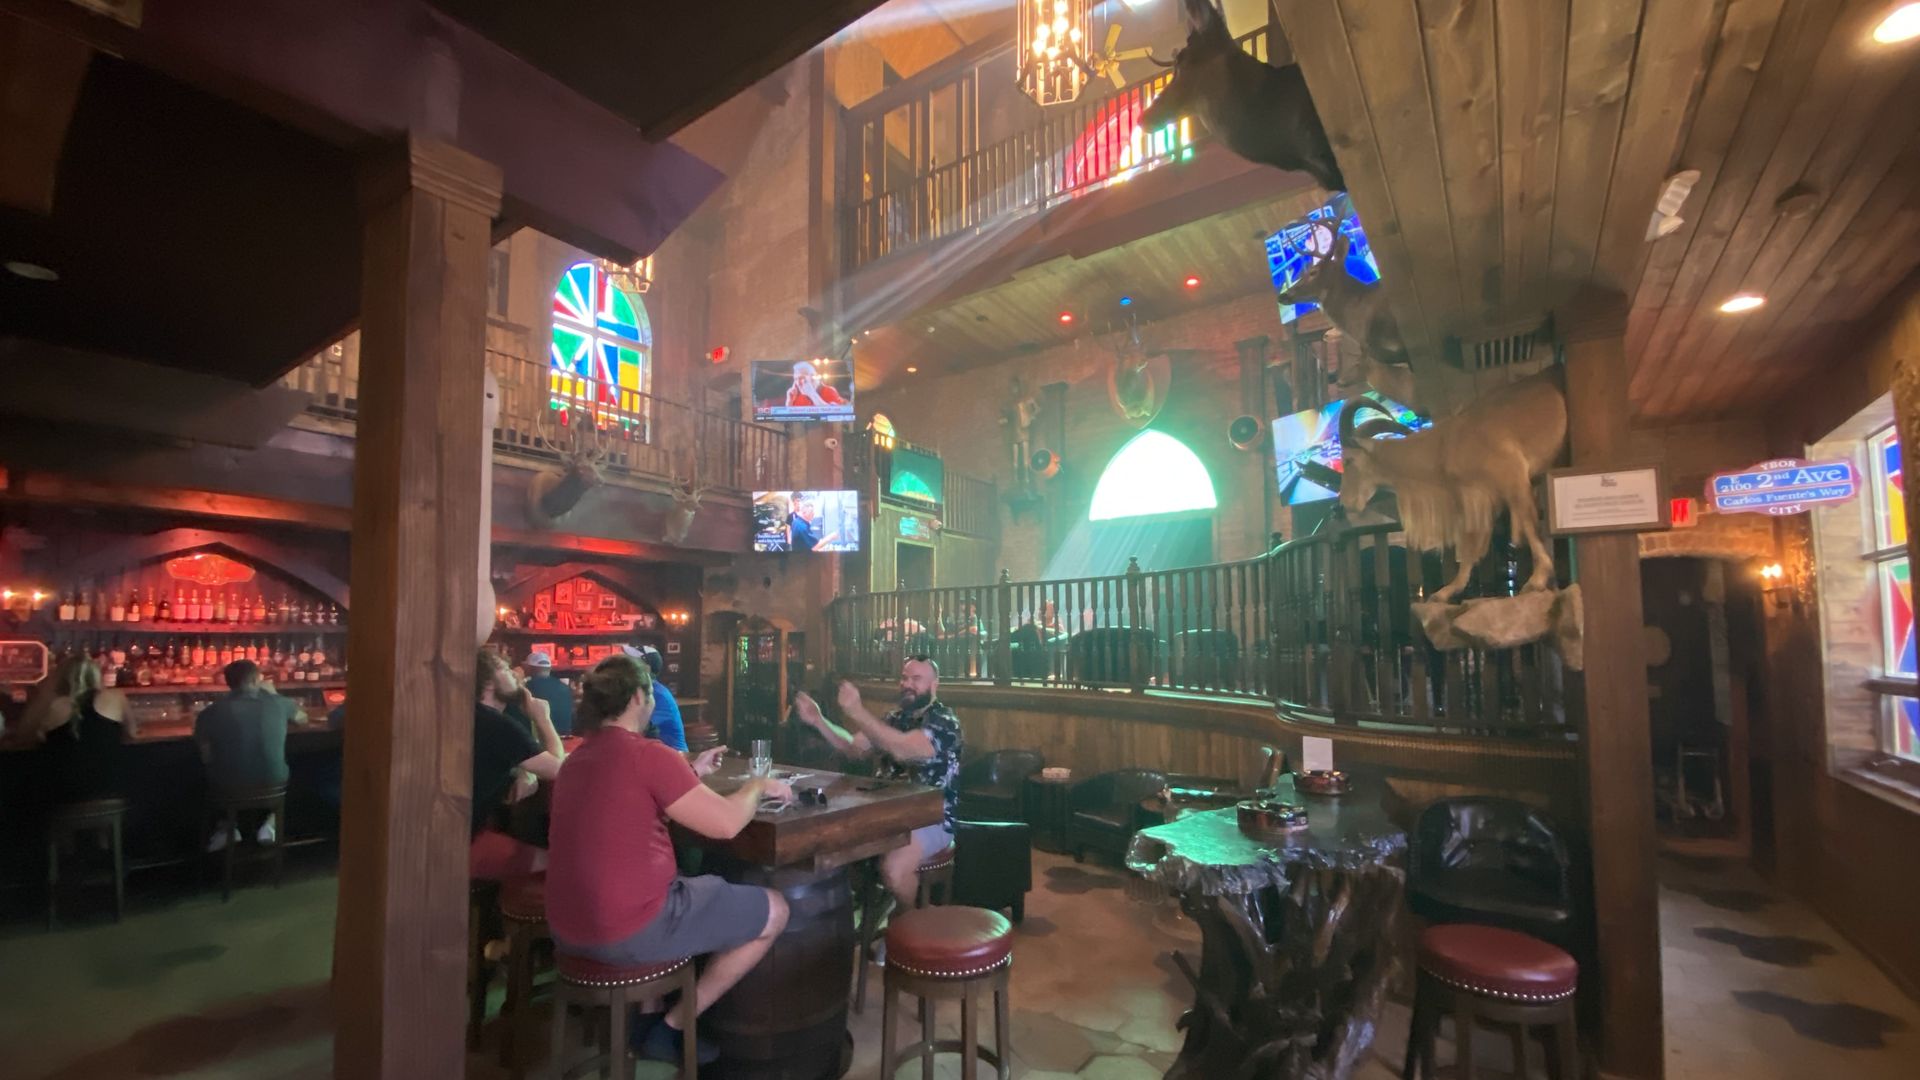 The interior of the Grand Cathedral cigar bar, with people engaged in conversation on barstools.